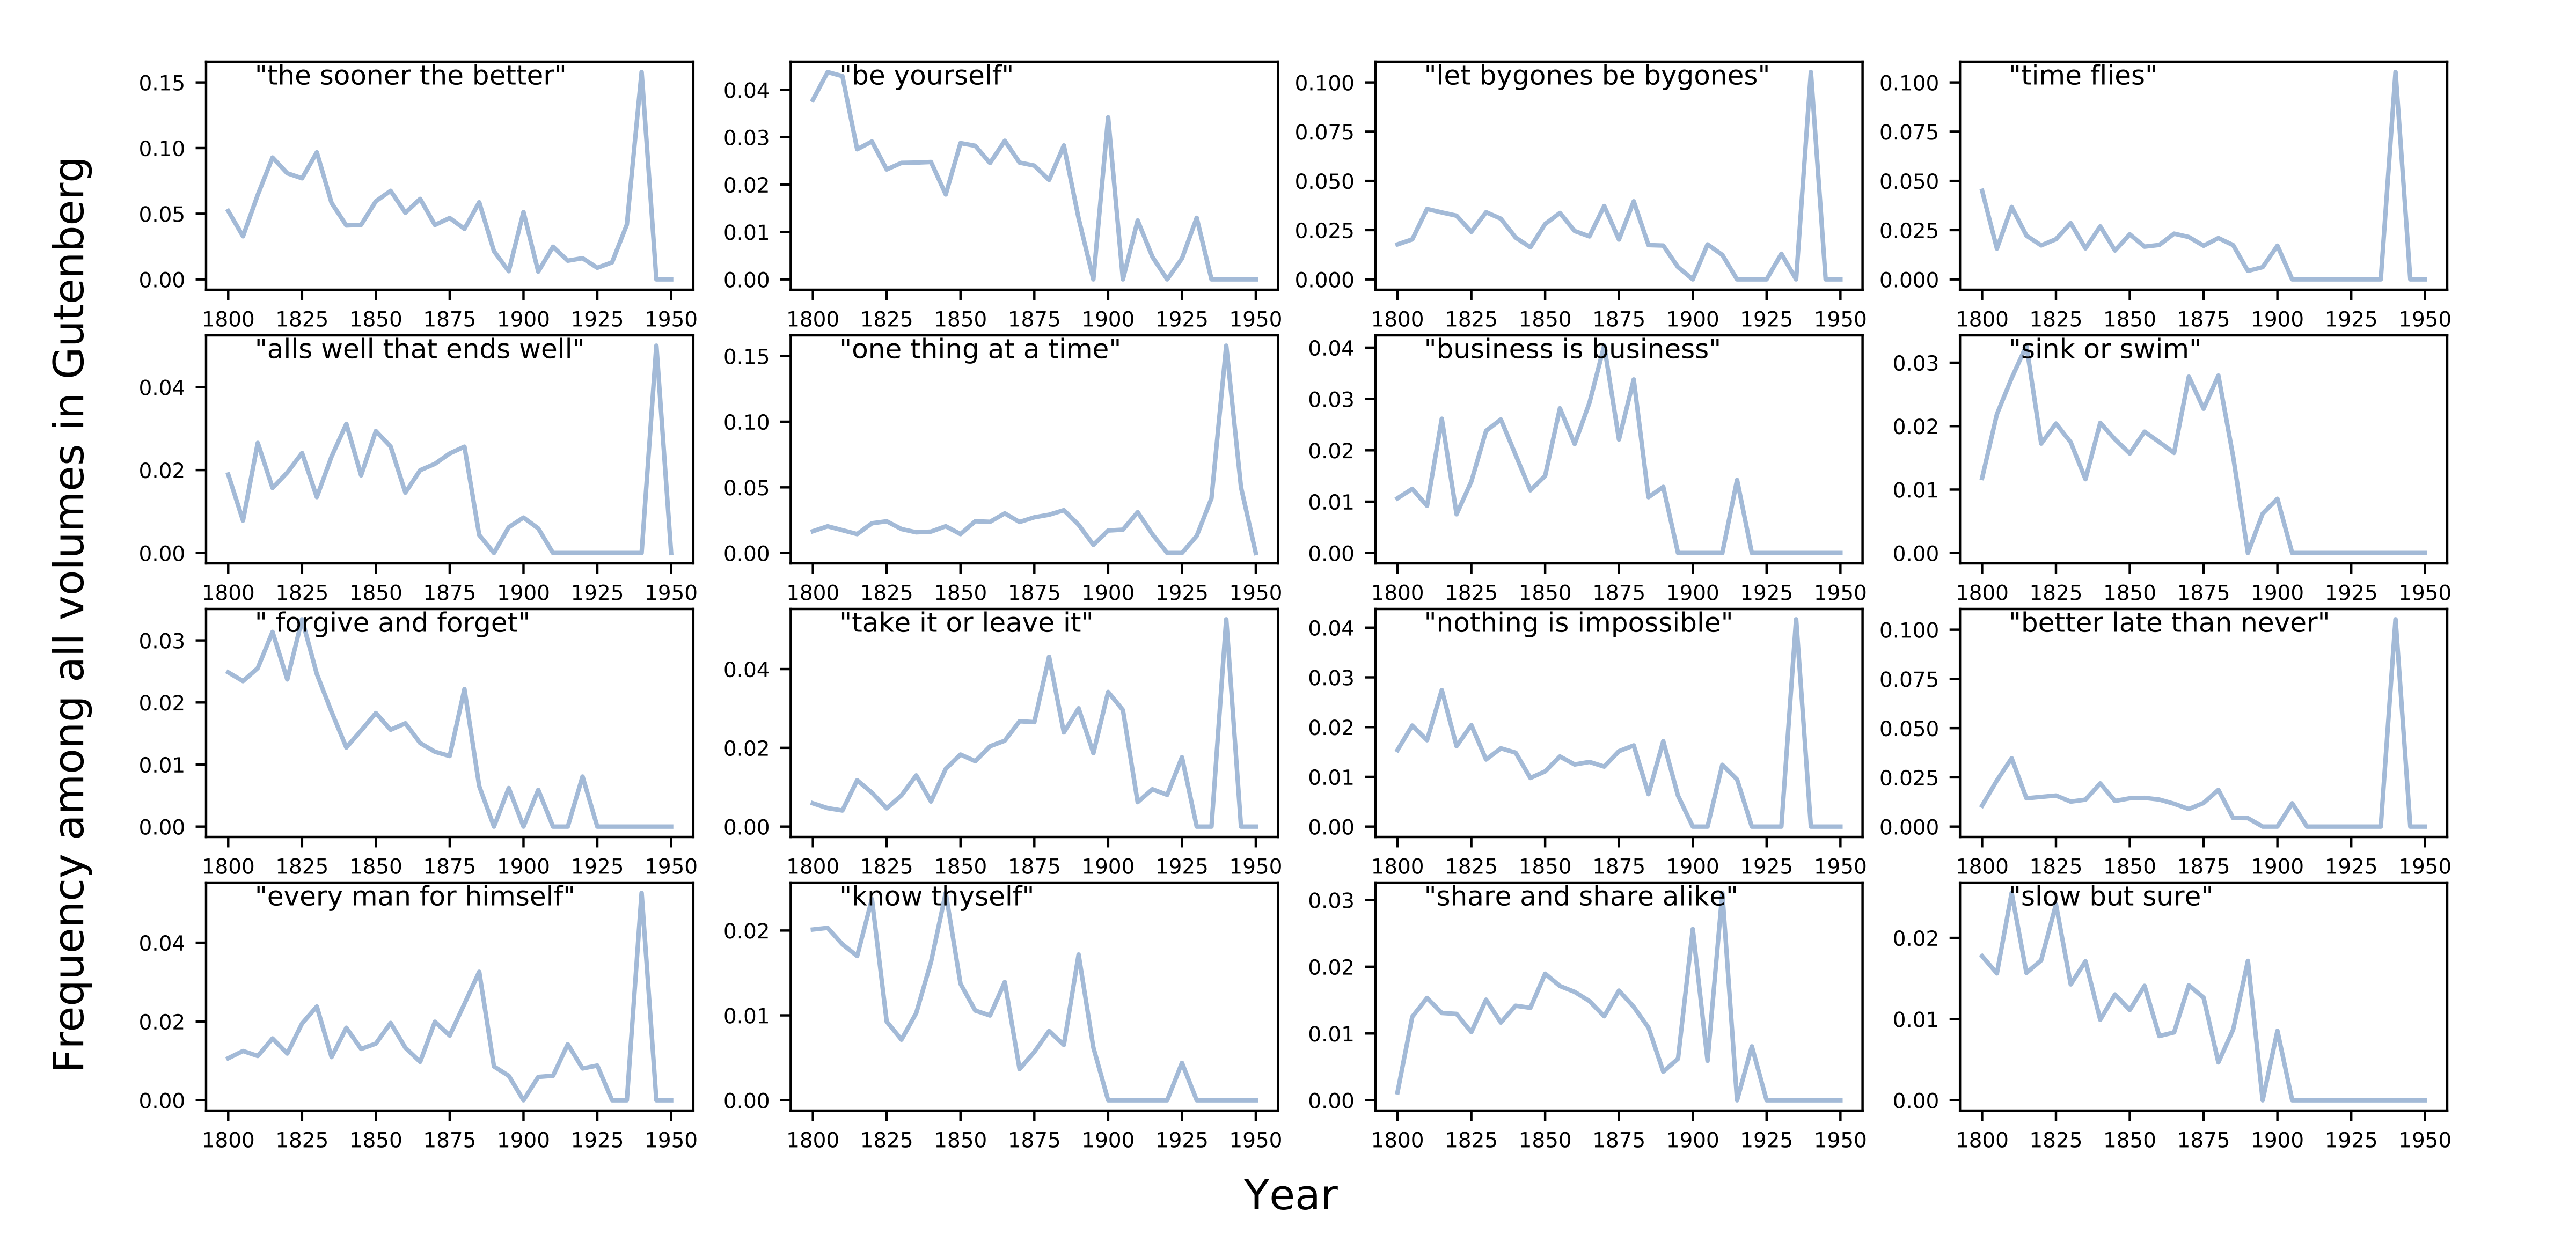 sixteen frequency charts showing frequencies on the y axes and years on the x axes. The years go from 1800-1950